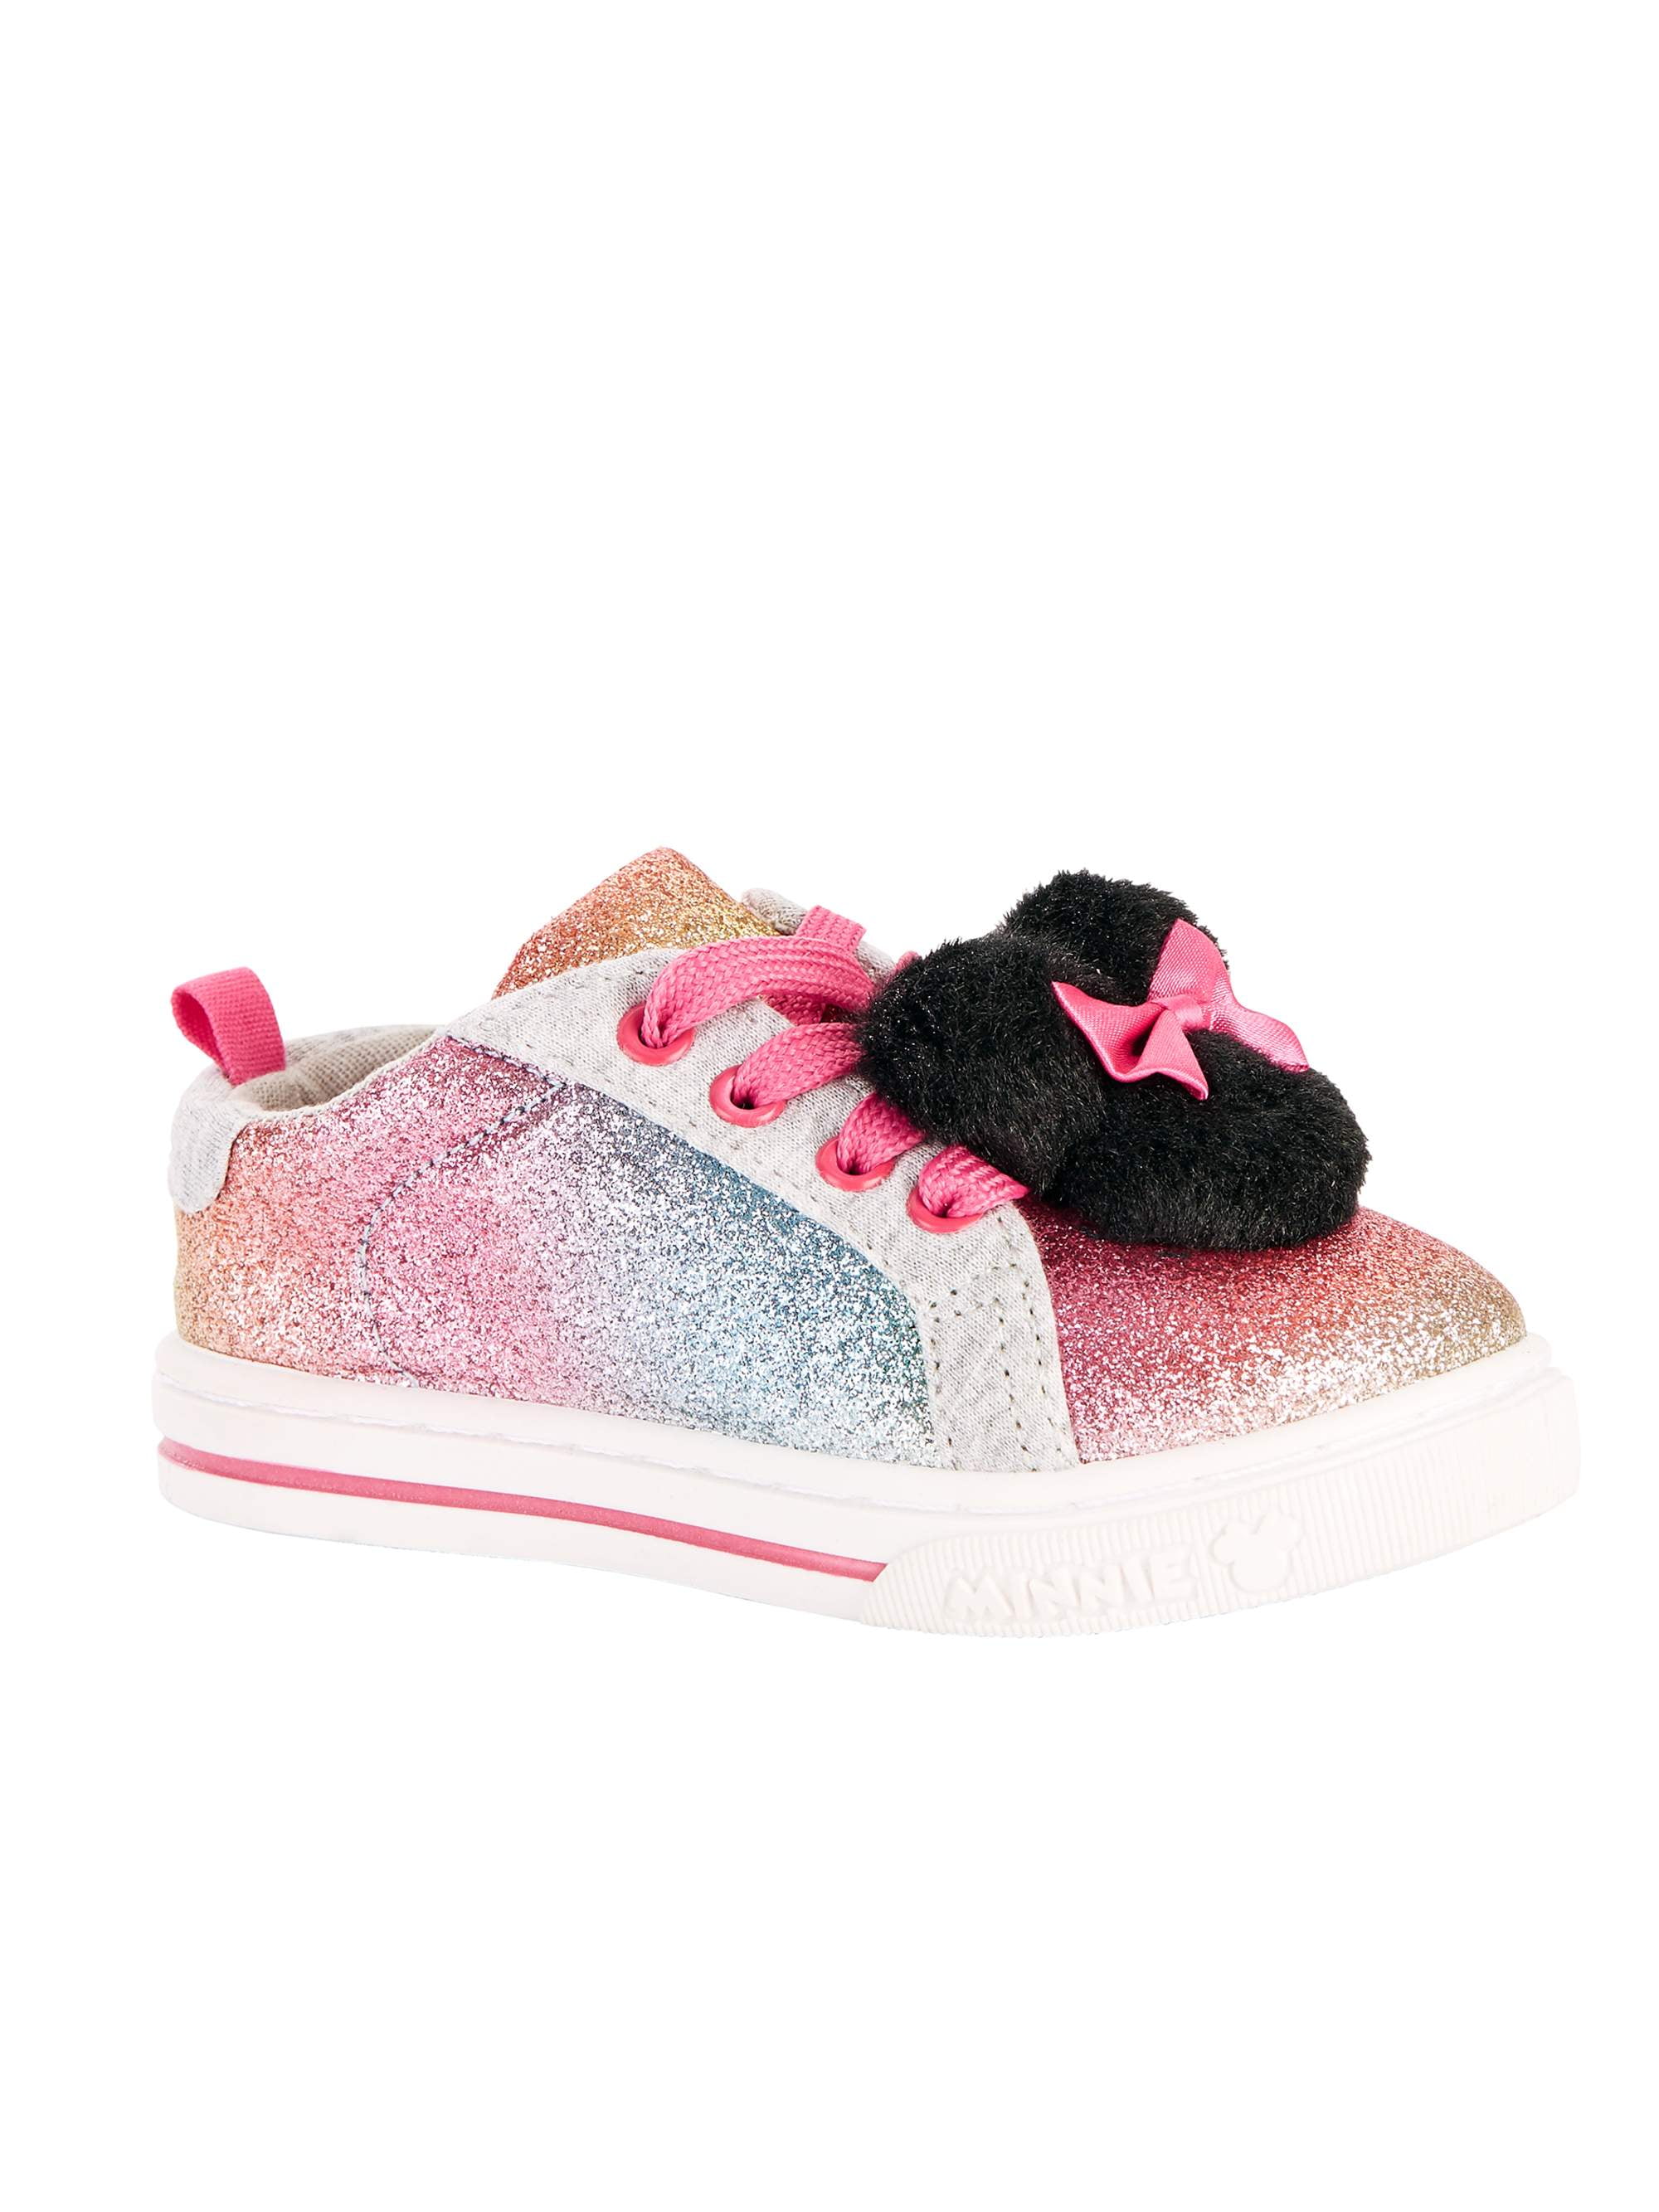 Disney Minnie Mouse Casual Rainbow Pom Sneaker (Toddler Girls ...